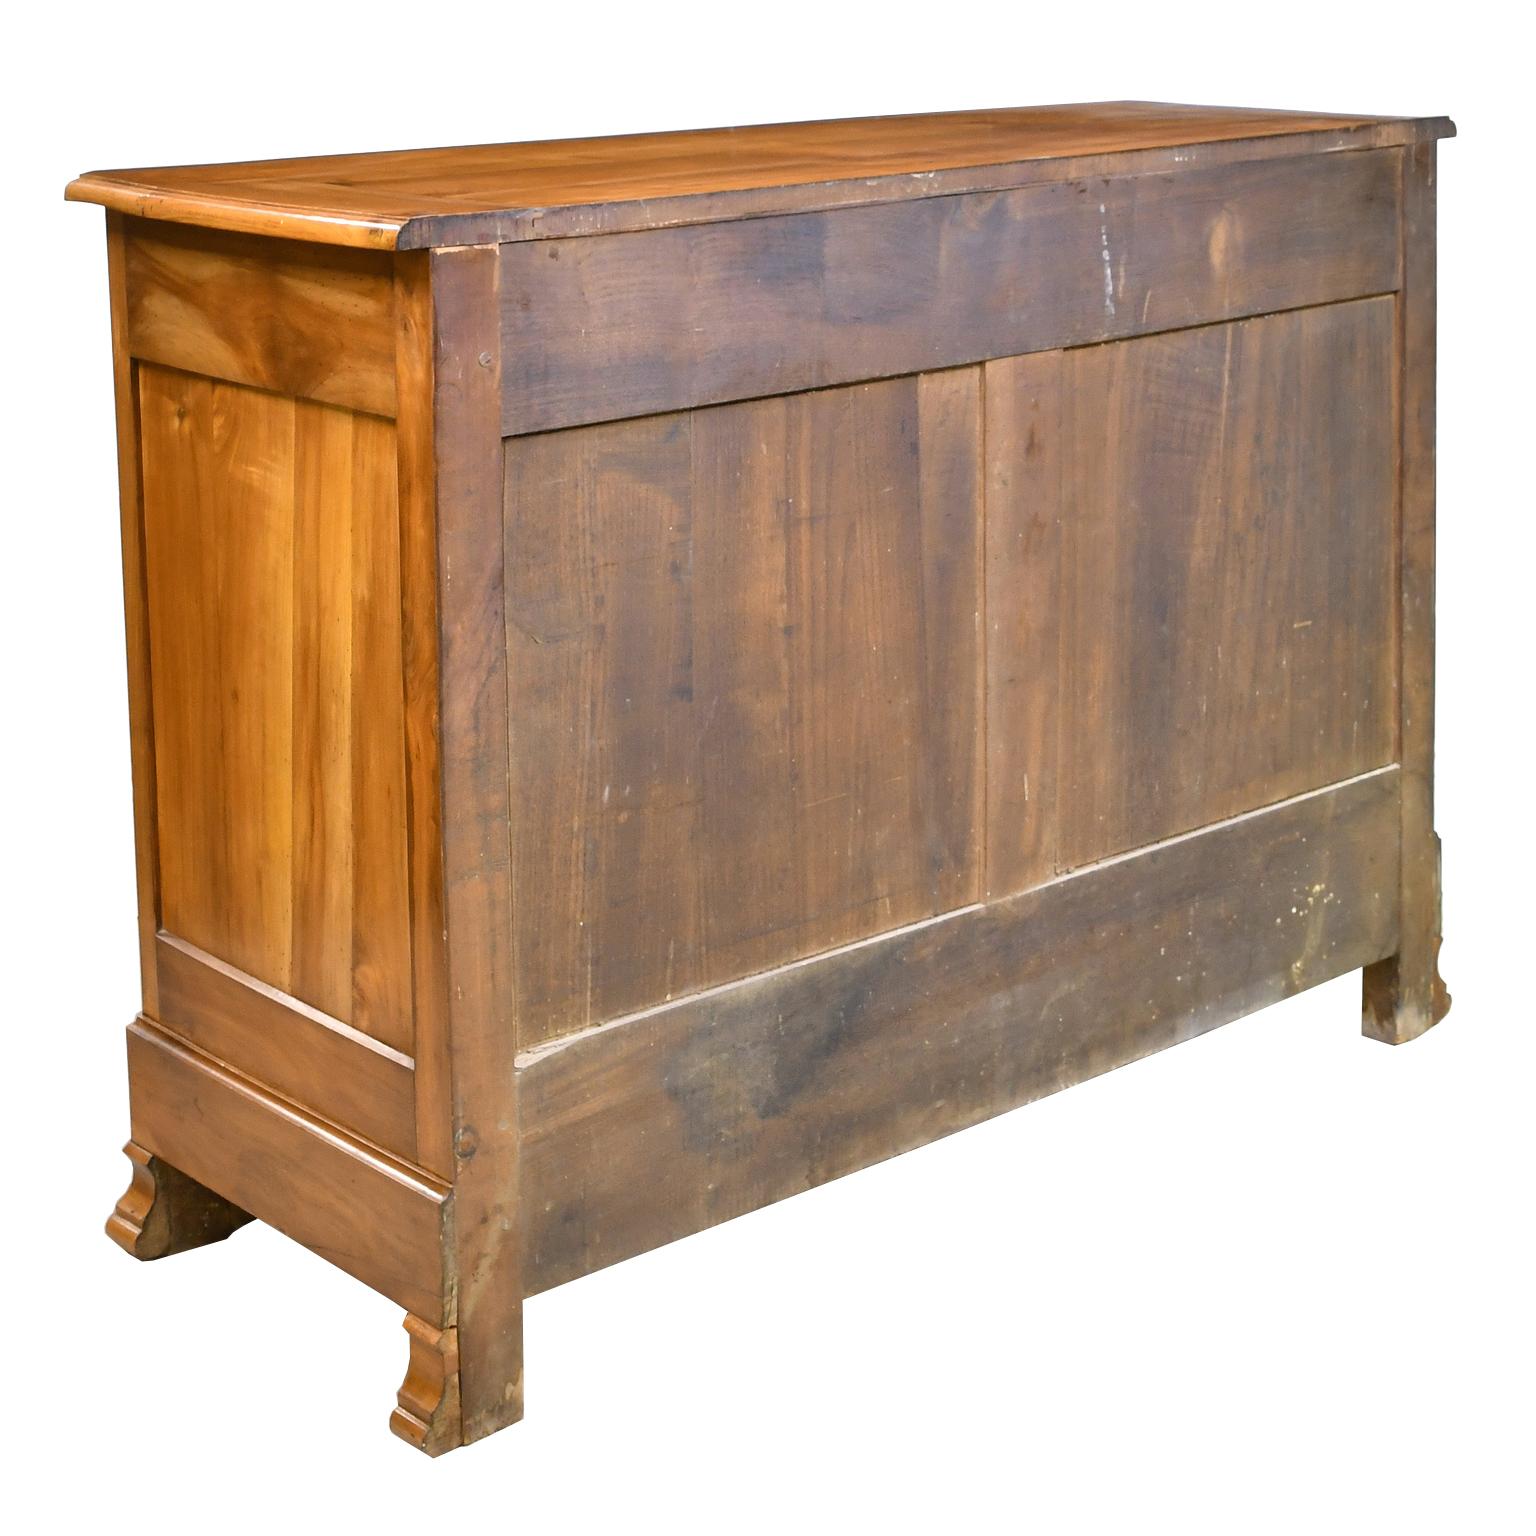 Mid-19th Century French Louis Philippe Buffet or Cabinet in Cherrywood, circa 1840